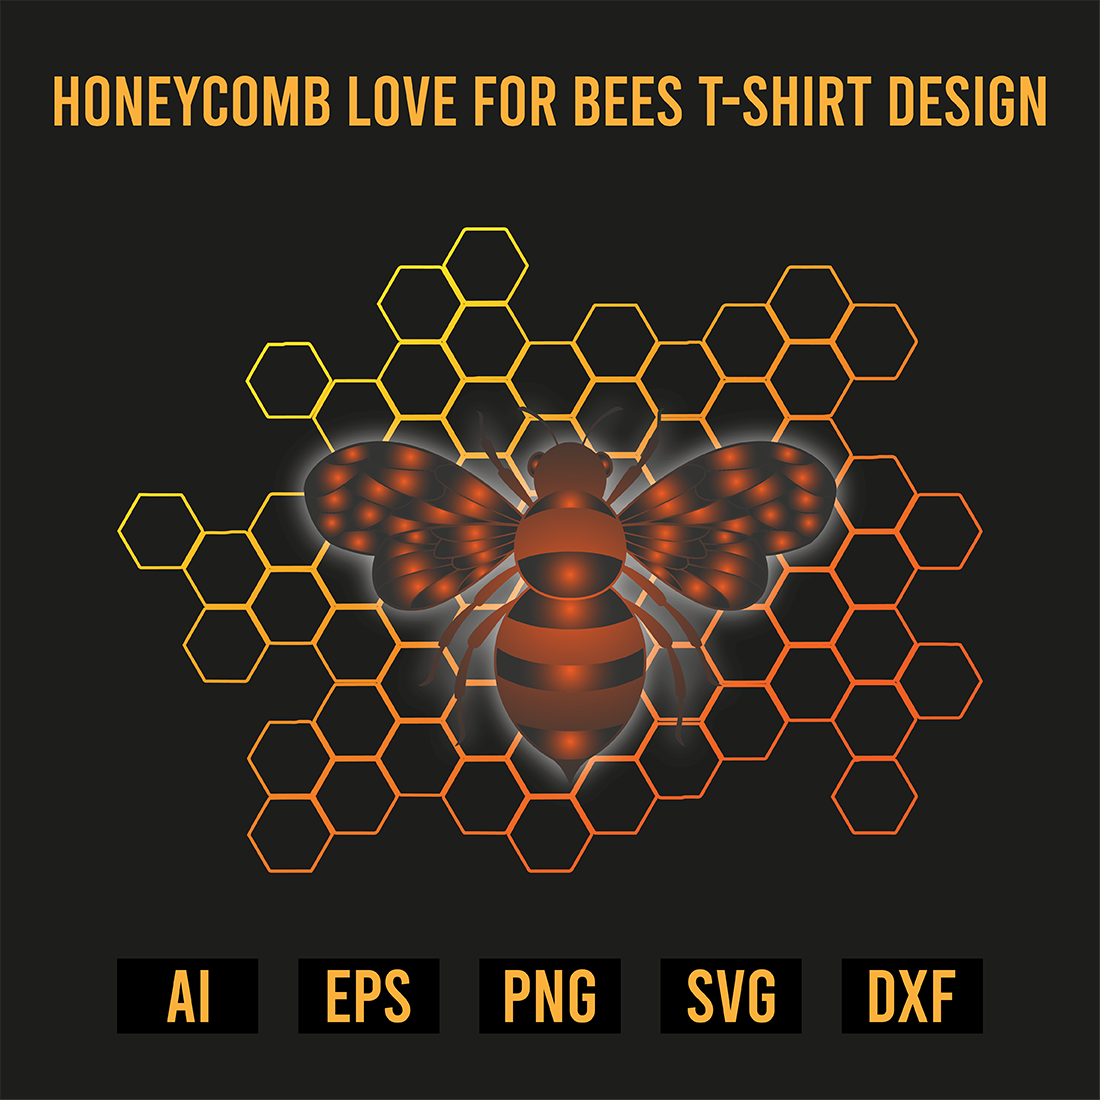 Honeycomb Love For Bees T- Shirt Design cover image.